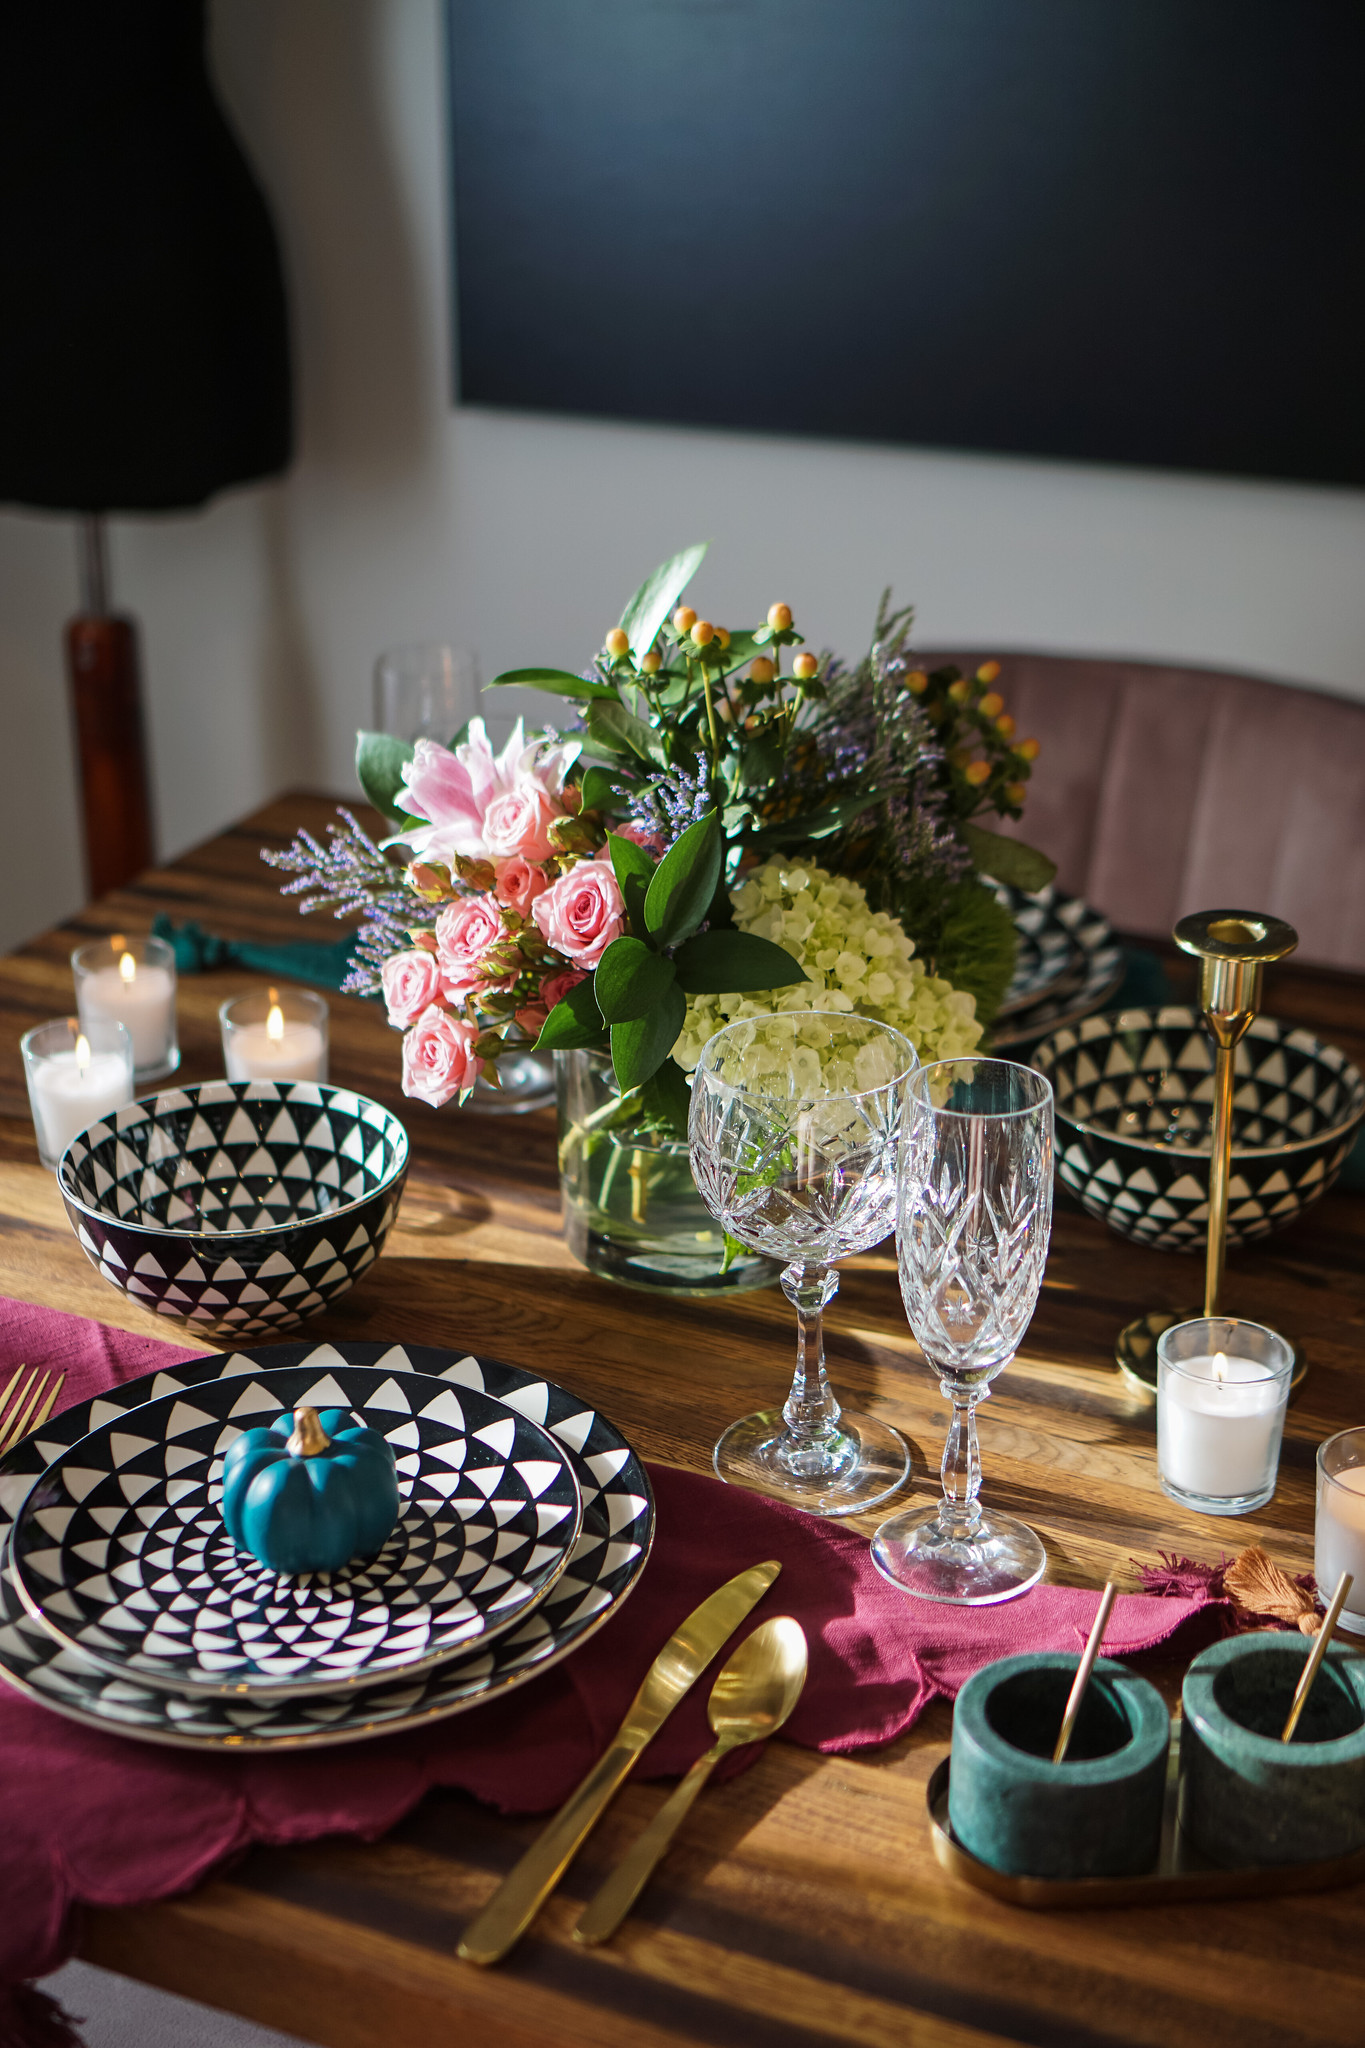 Fall Tablescapes featuring Fall Flowers, Gold Accents, Black & White Geometric Dishes | Boho Holiday Tablescapes | Fall Decor | Affordable Decor Ideas | Fall Table Centerpiece | Jewel Toned Table Settings